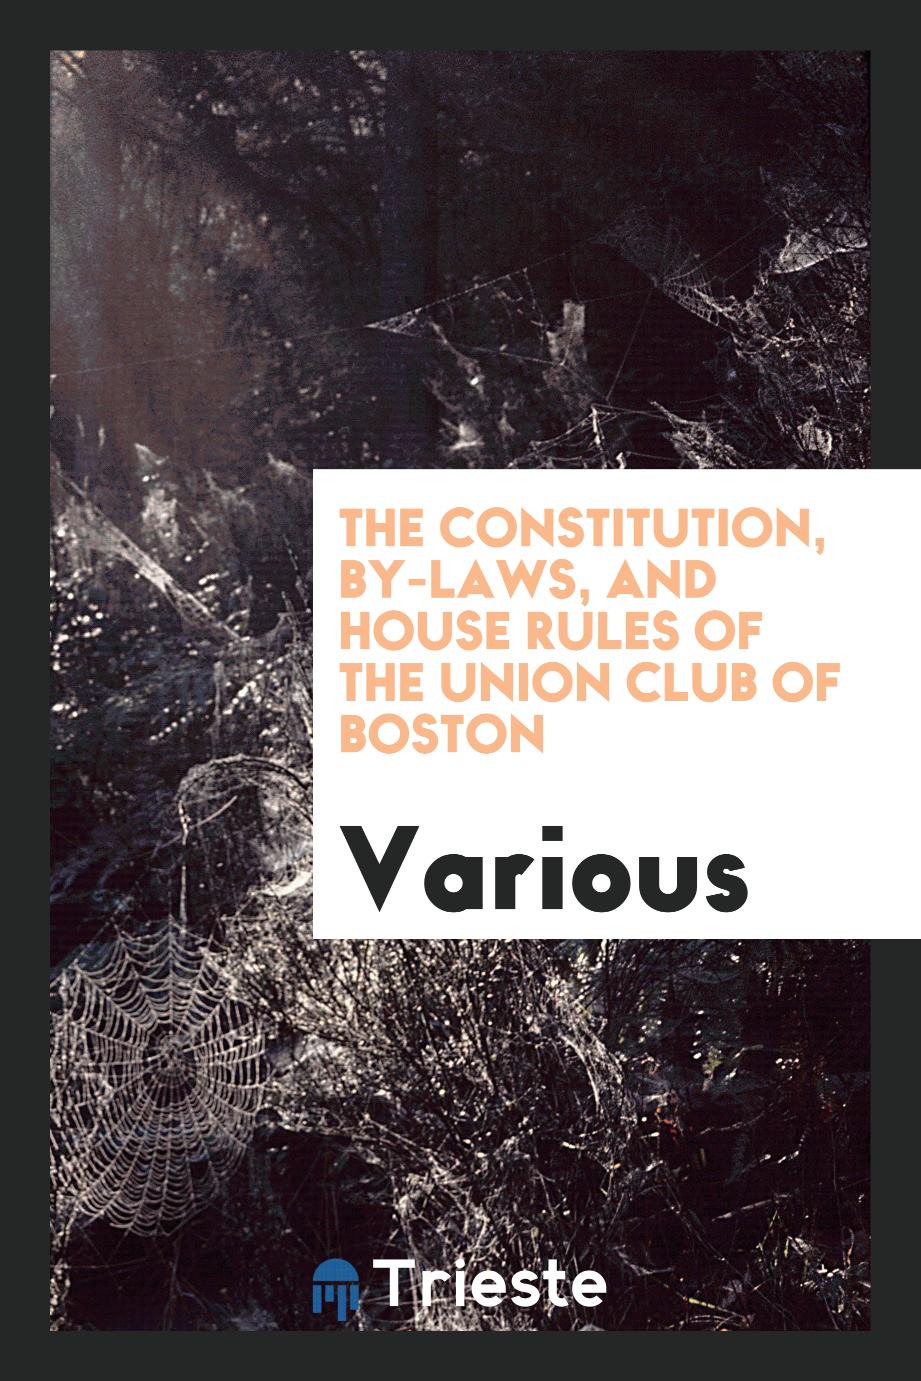 The Constitution, by-laws, and house rules of the Union Club of Boston